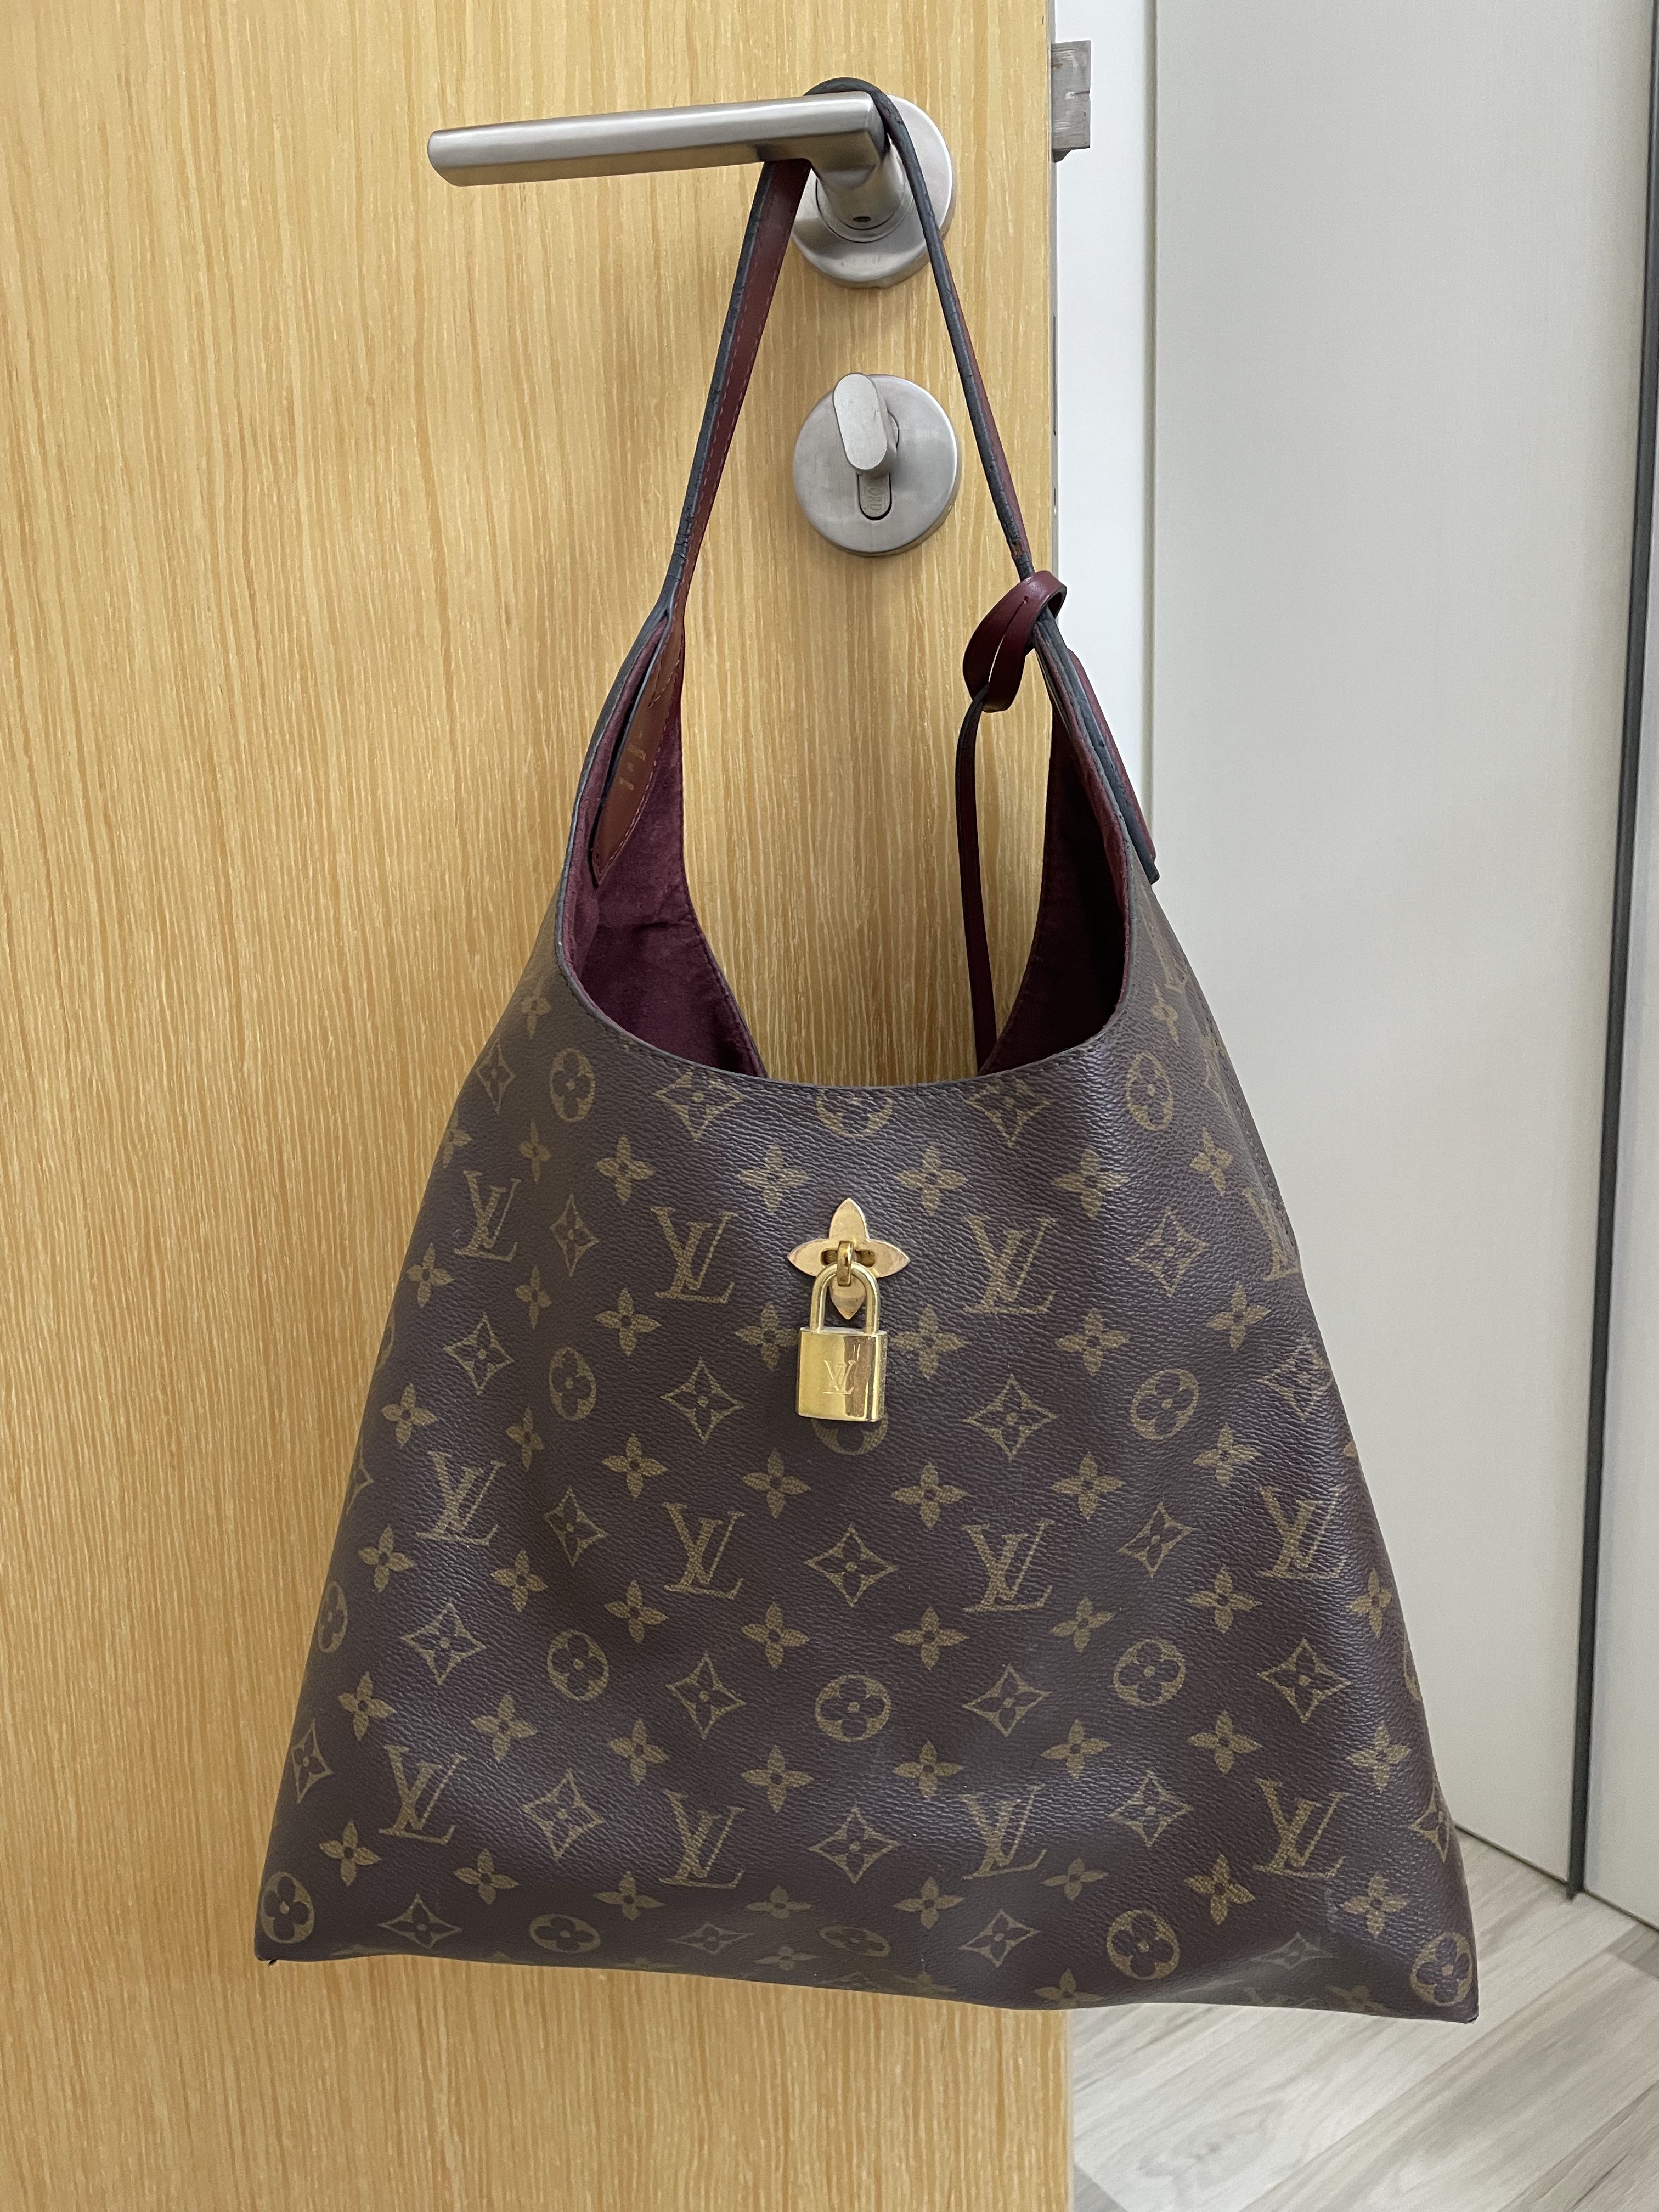 Authenticated Used LOUIS VUITTON Louis Vuitton Flower Hobo Shoulder Bag  M43545 Monogram Canvas Leather Brown Semi-Shoulder One Tote 